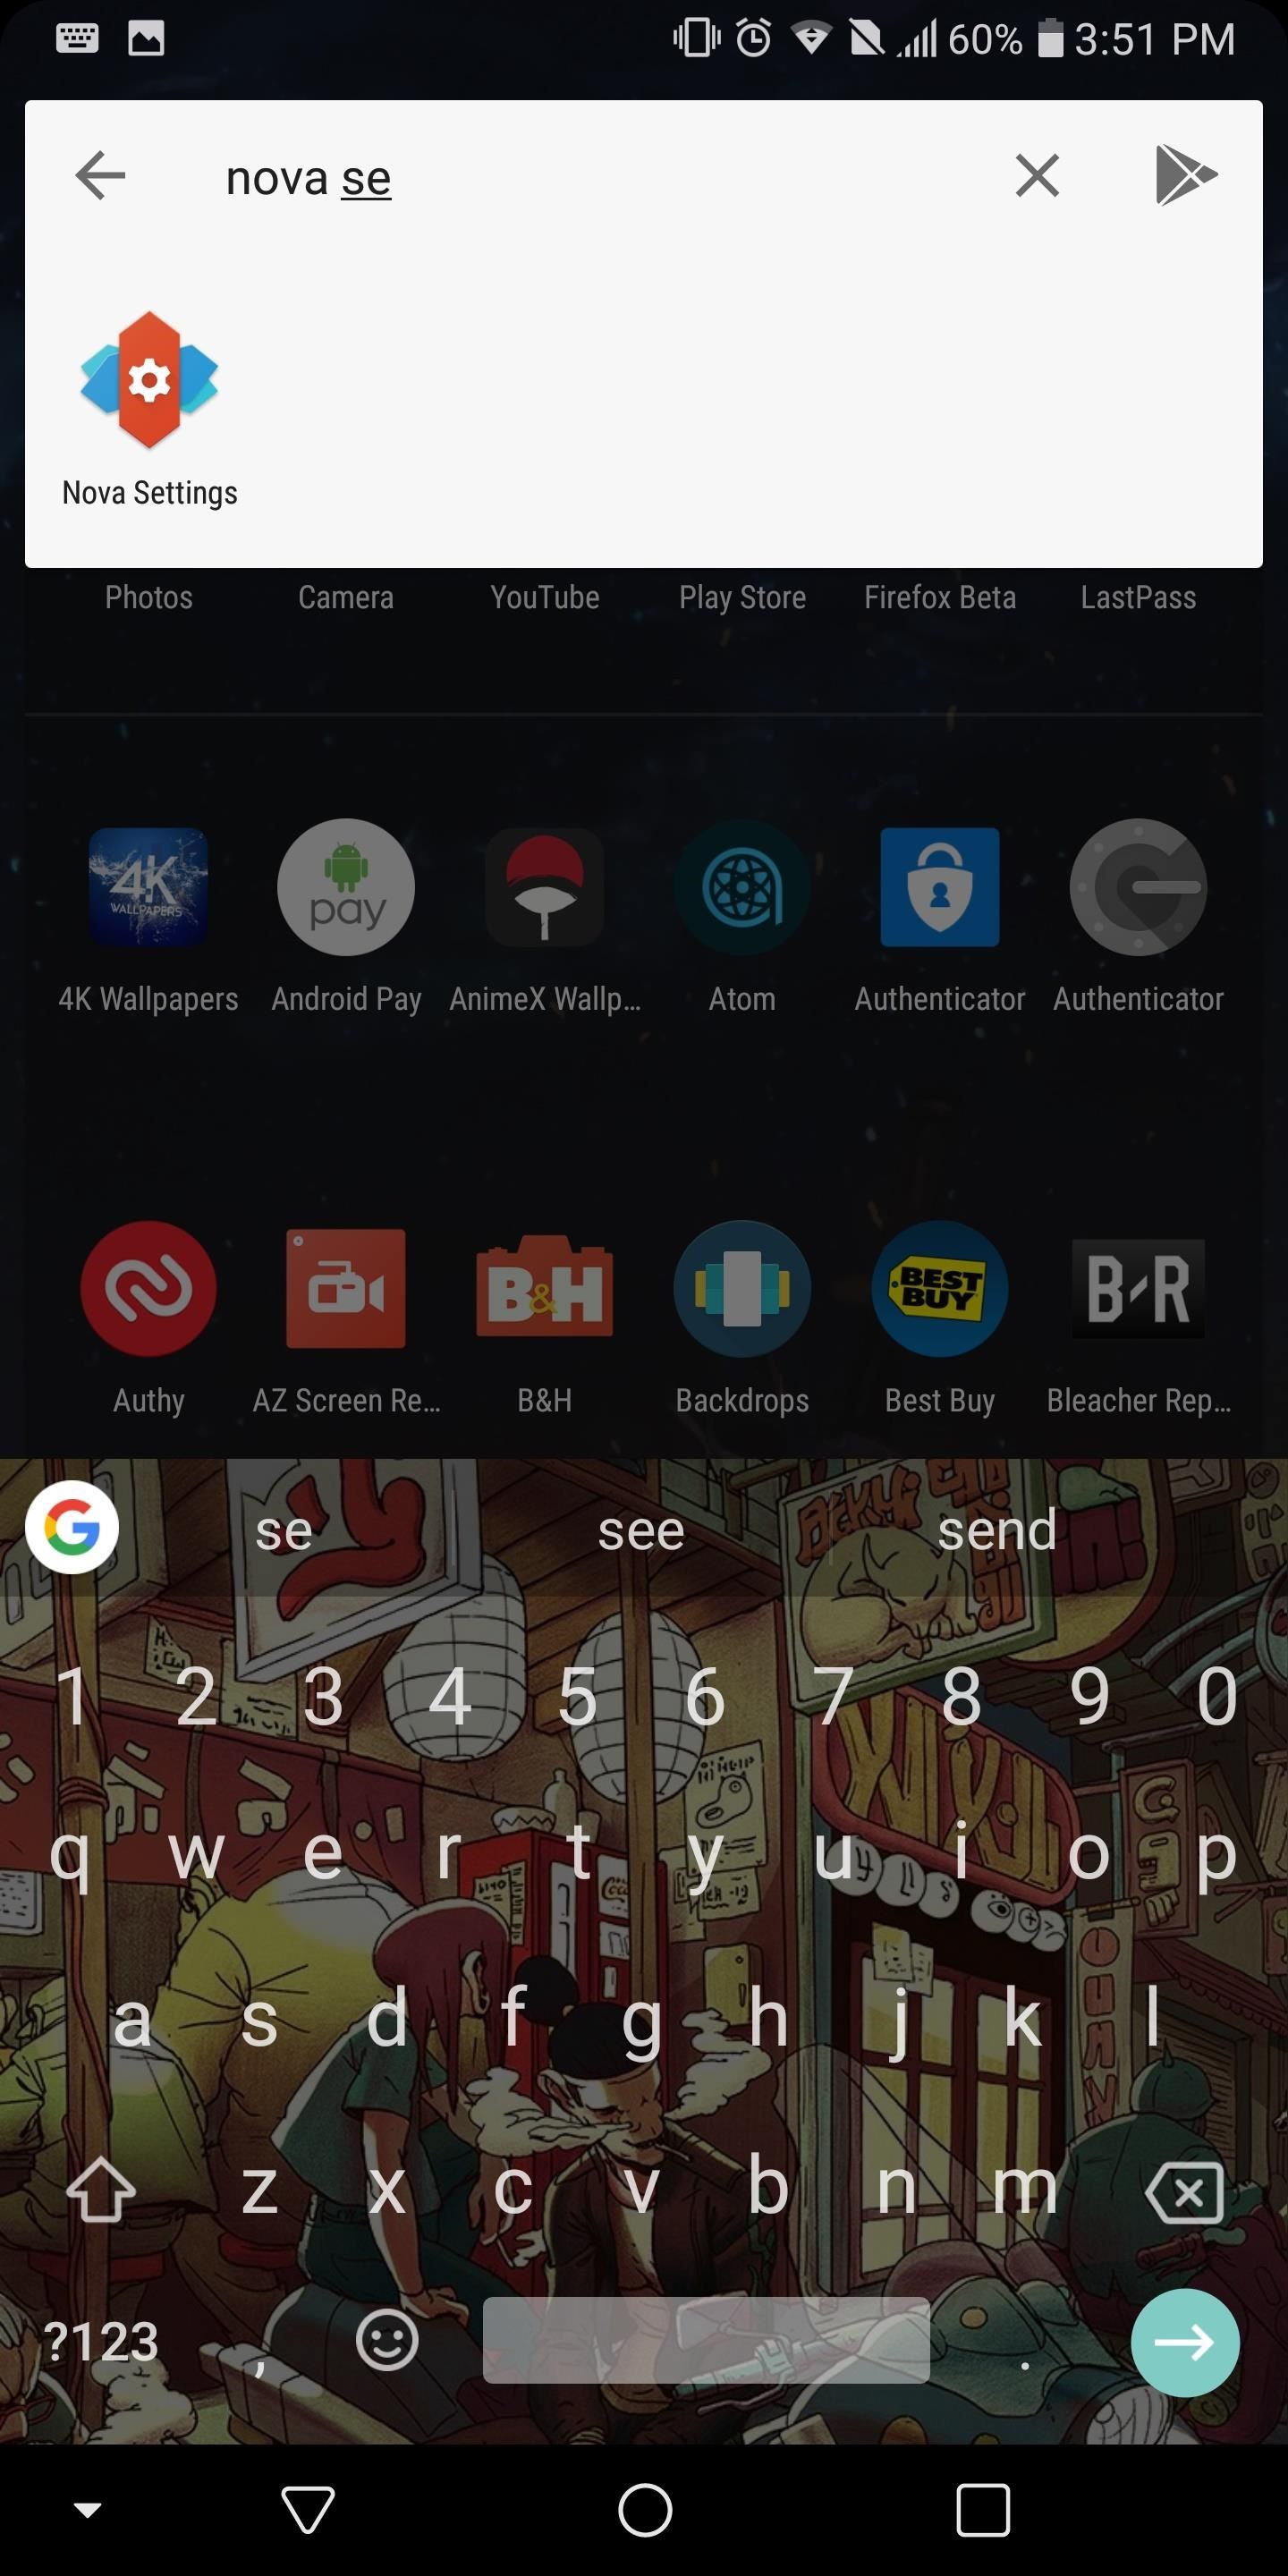 Nova Launcher 101: How to Organize Your App Drawer with Tab Groups